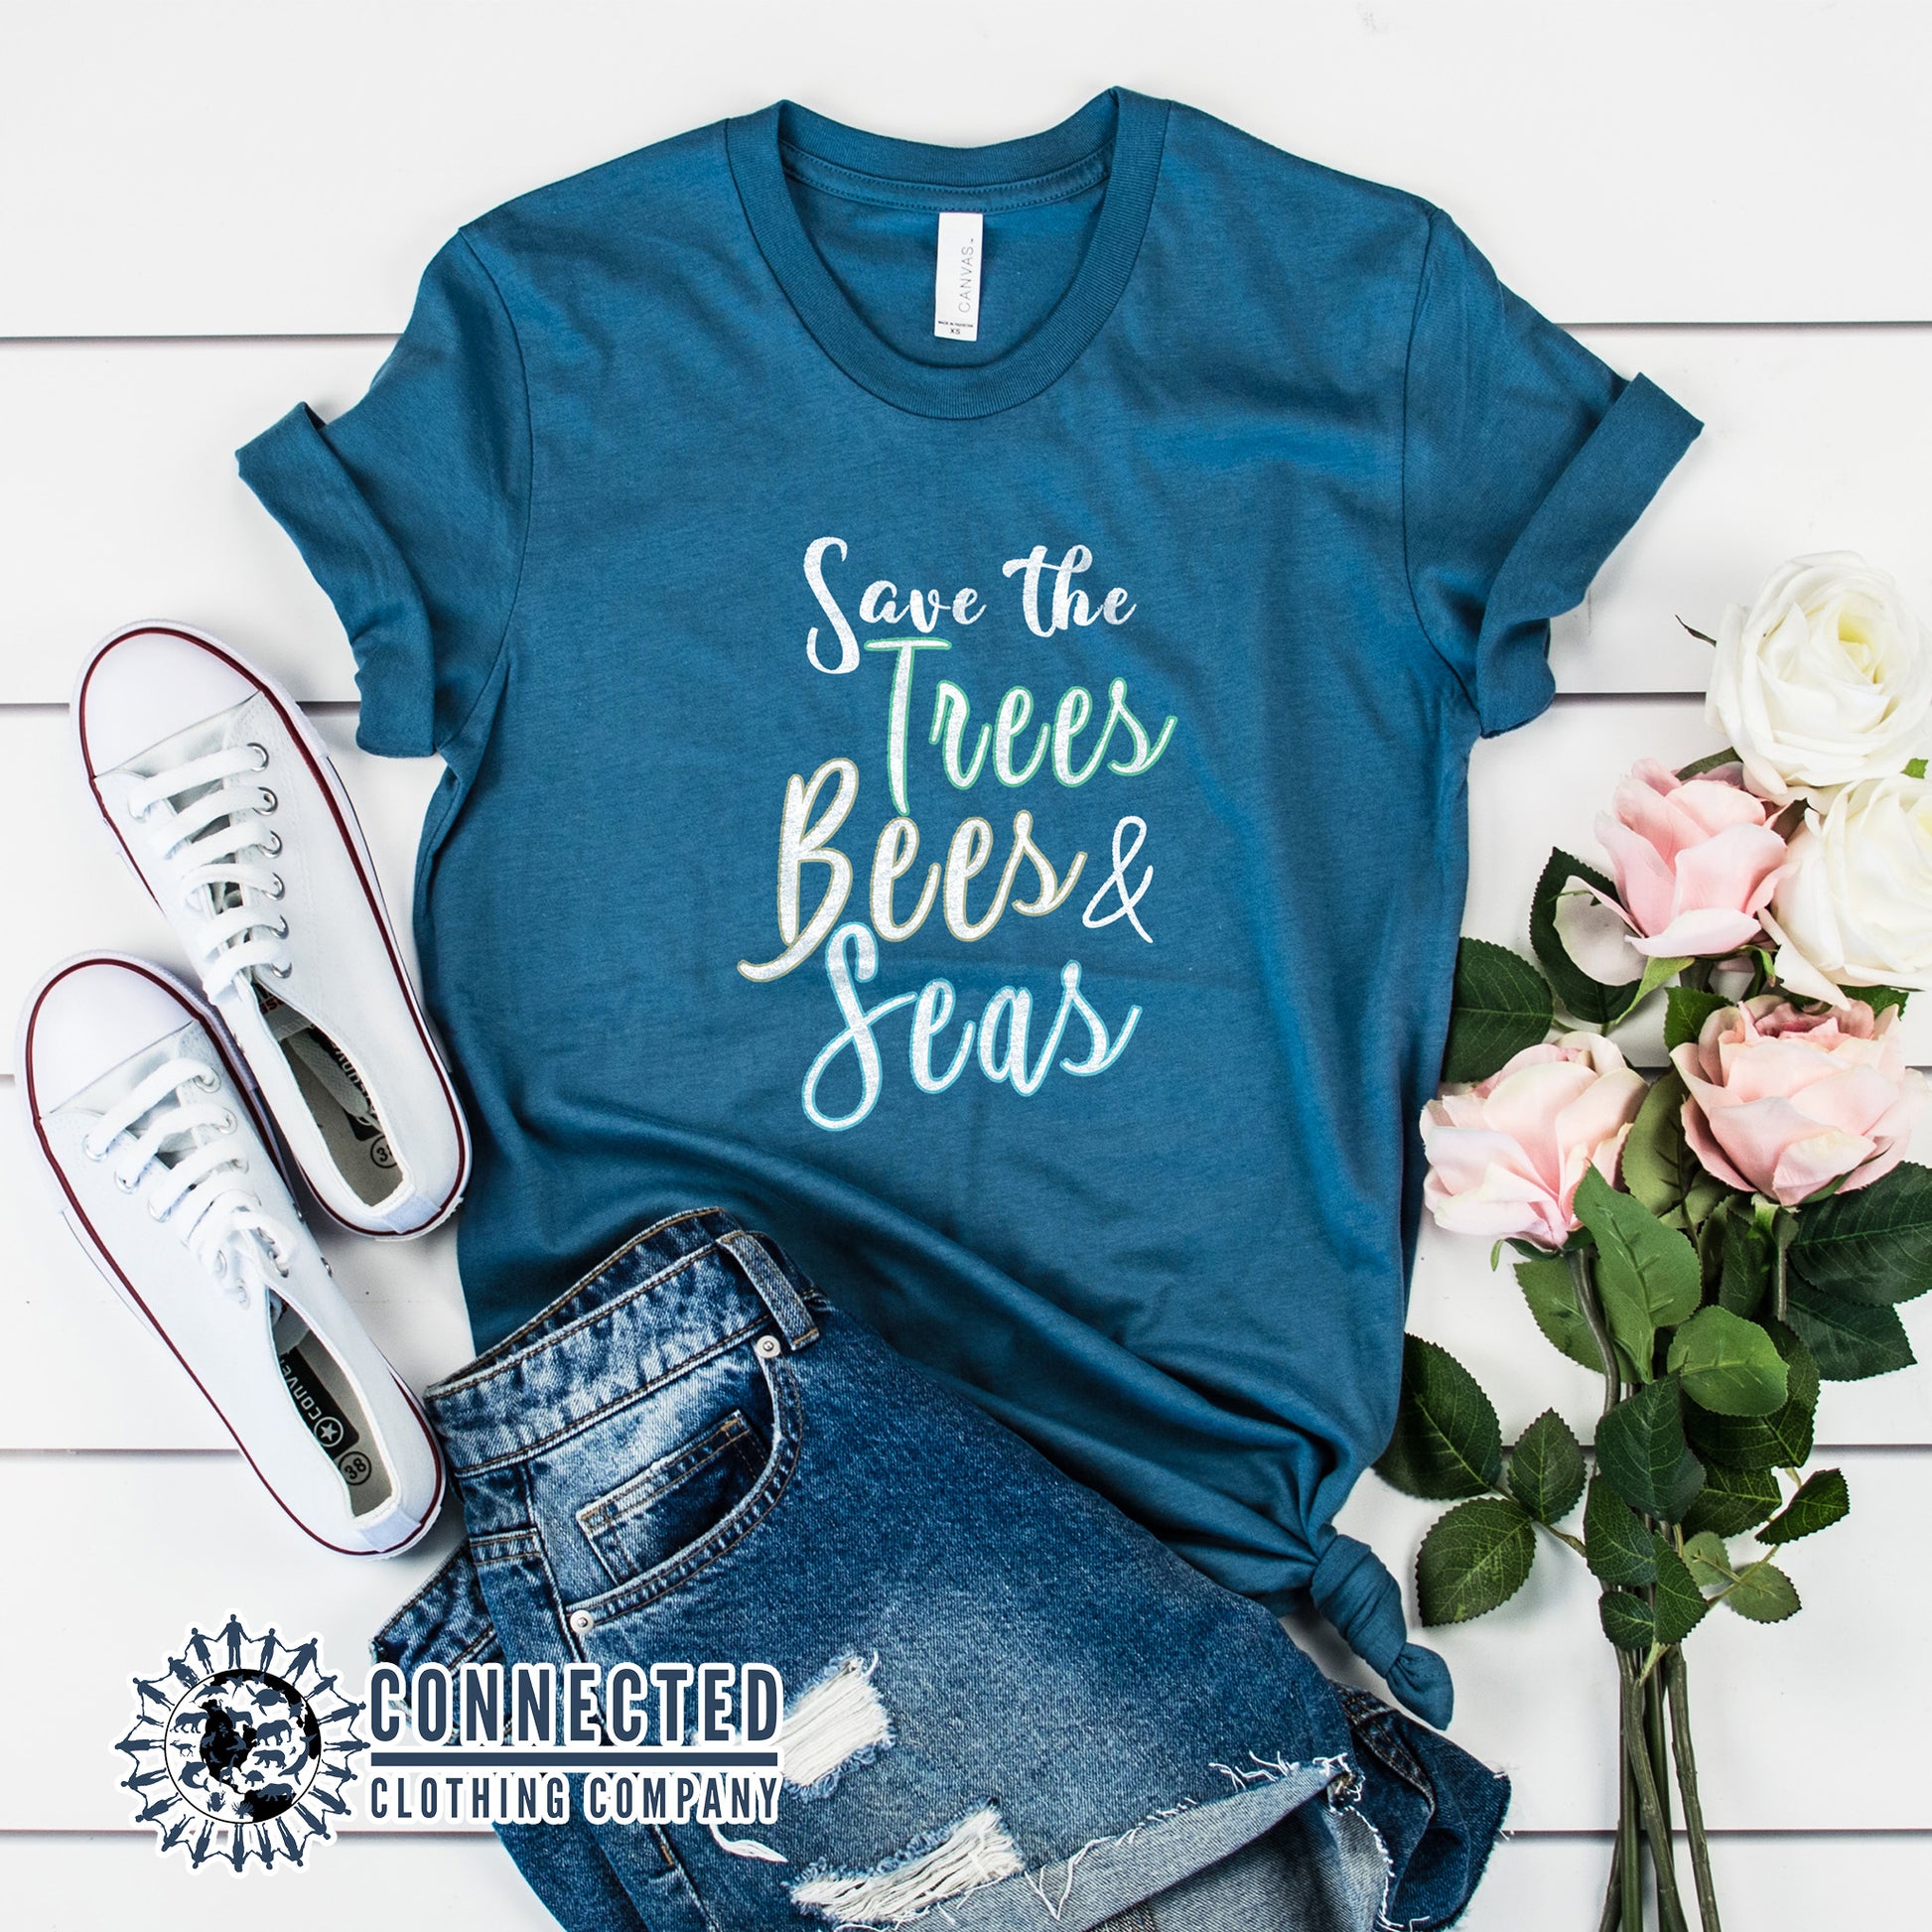 Steel Blue Save The Trees Bees & Seas Short-Sleeve Tee - Connected Clothing Company - Ethically and Sustainably Made - 10% donated to ocean conservation